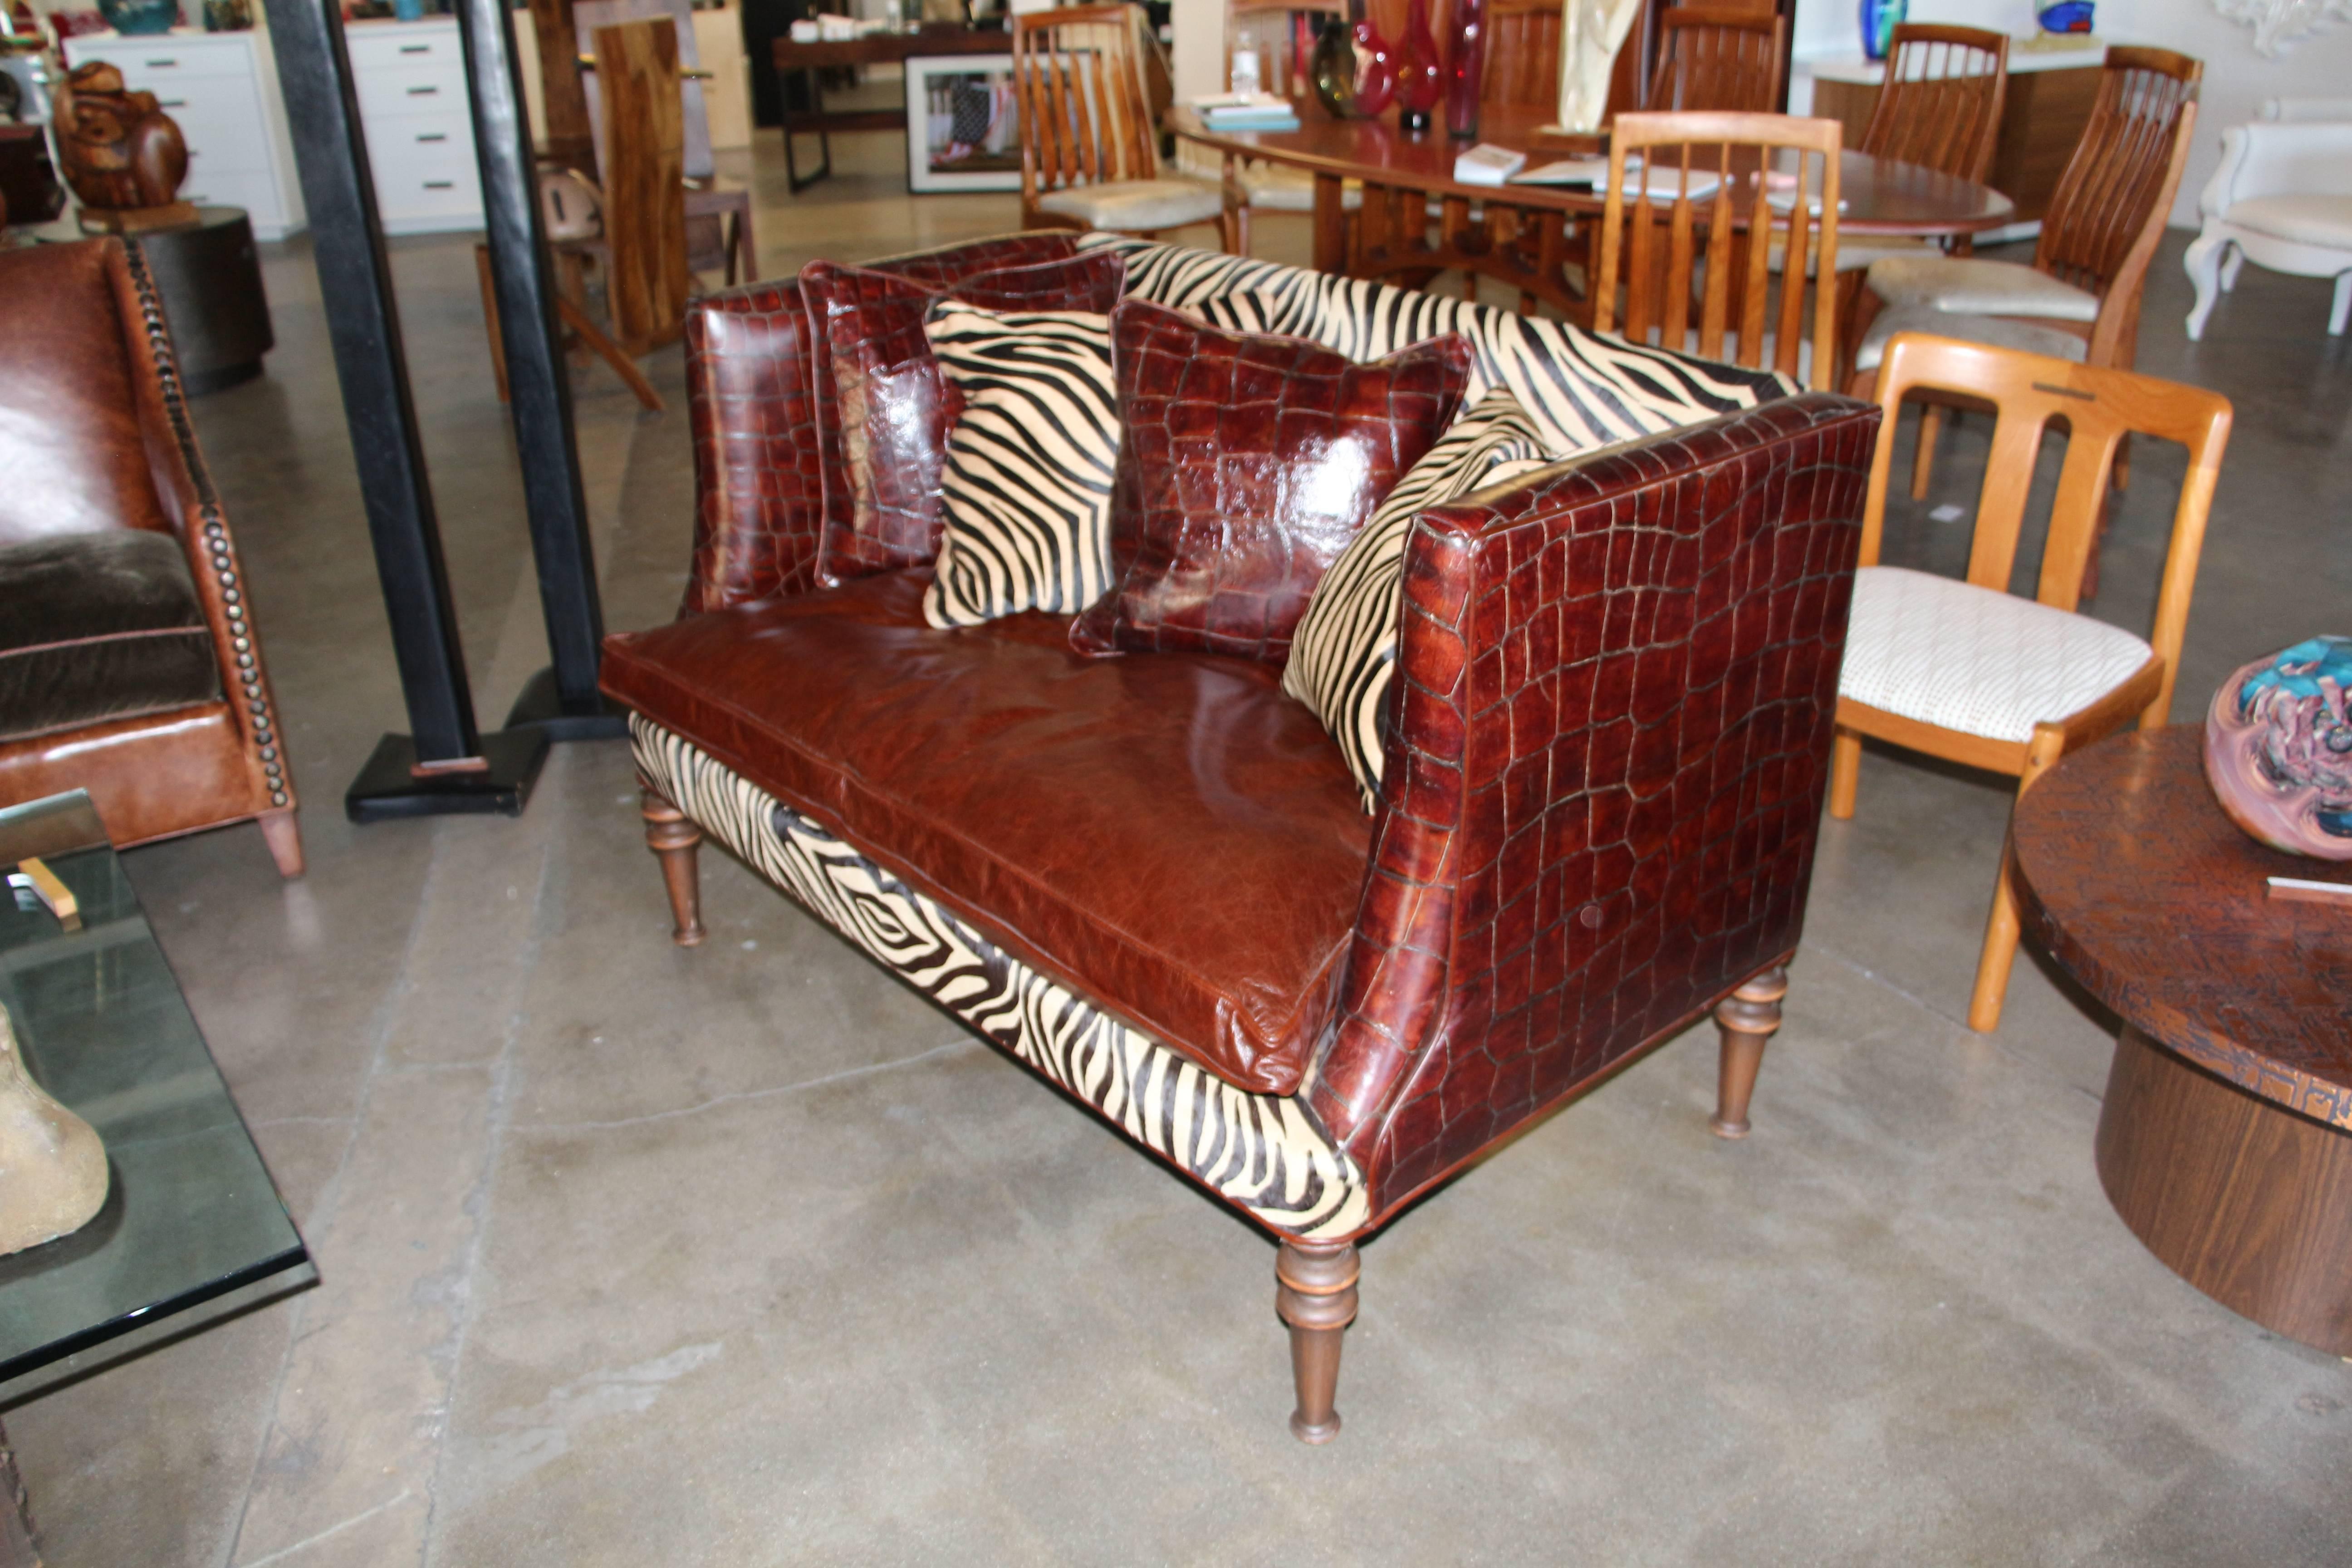 A wonderful loveseat or settee made by the Old Hickory Tannery company in the USA. It features high quality leather in a crocodile or alligator pattern and zebra pattern horsehide. Included are four pillows. This company's products are of extremely